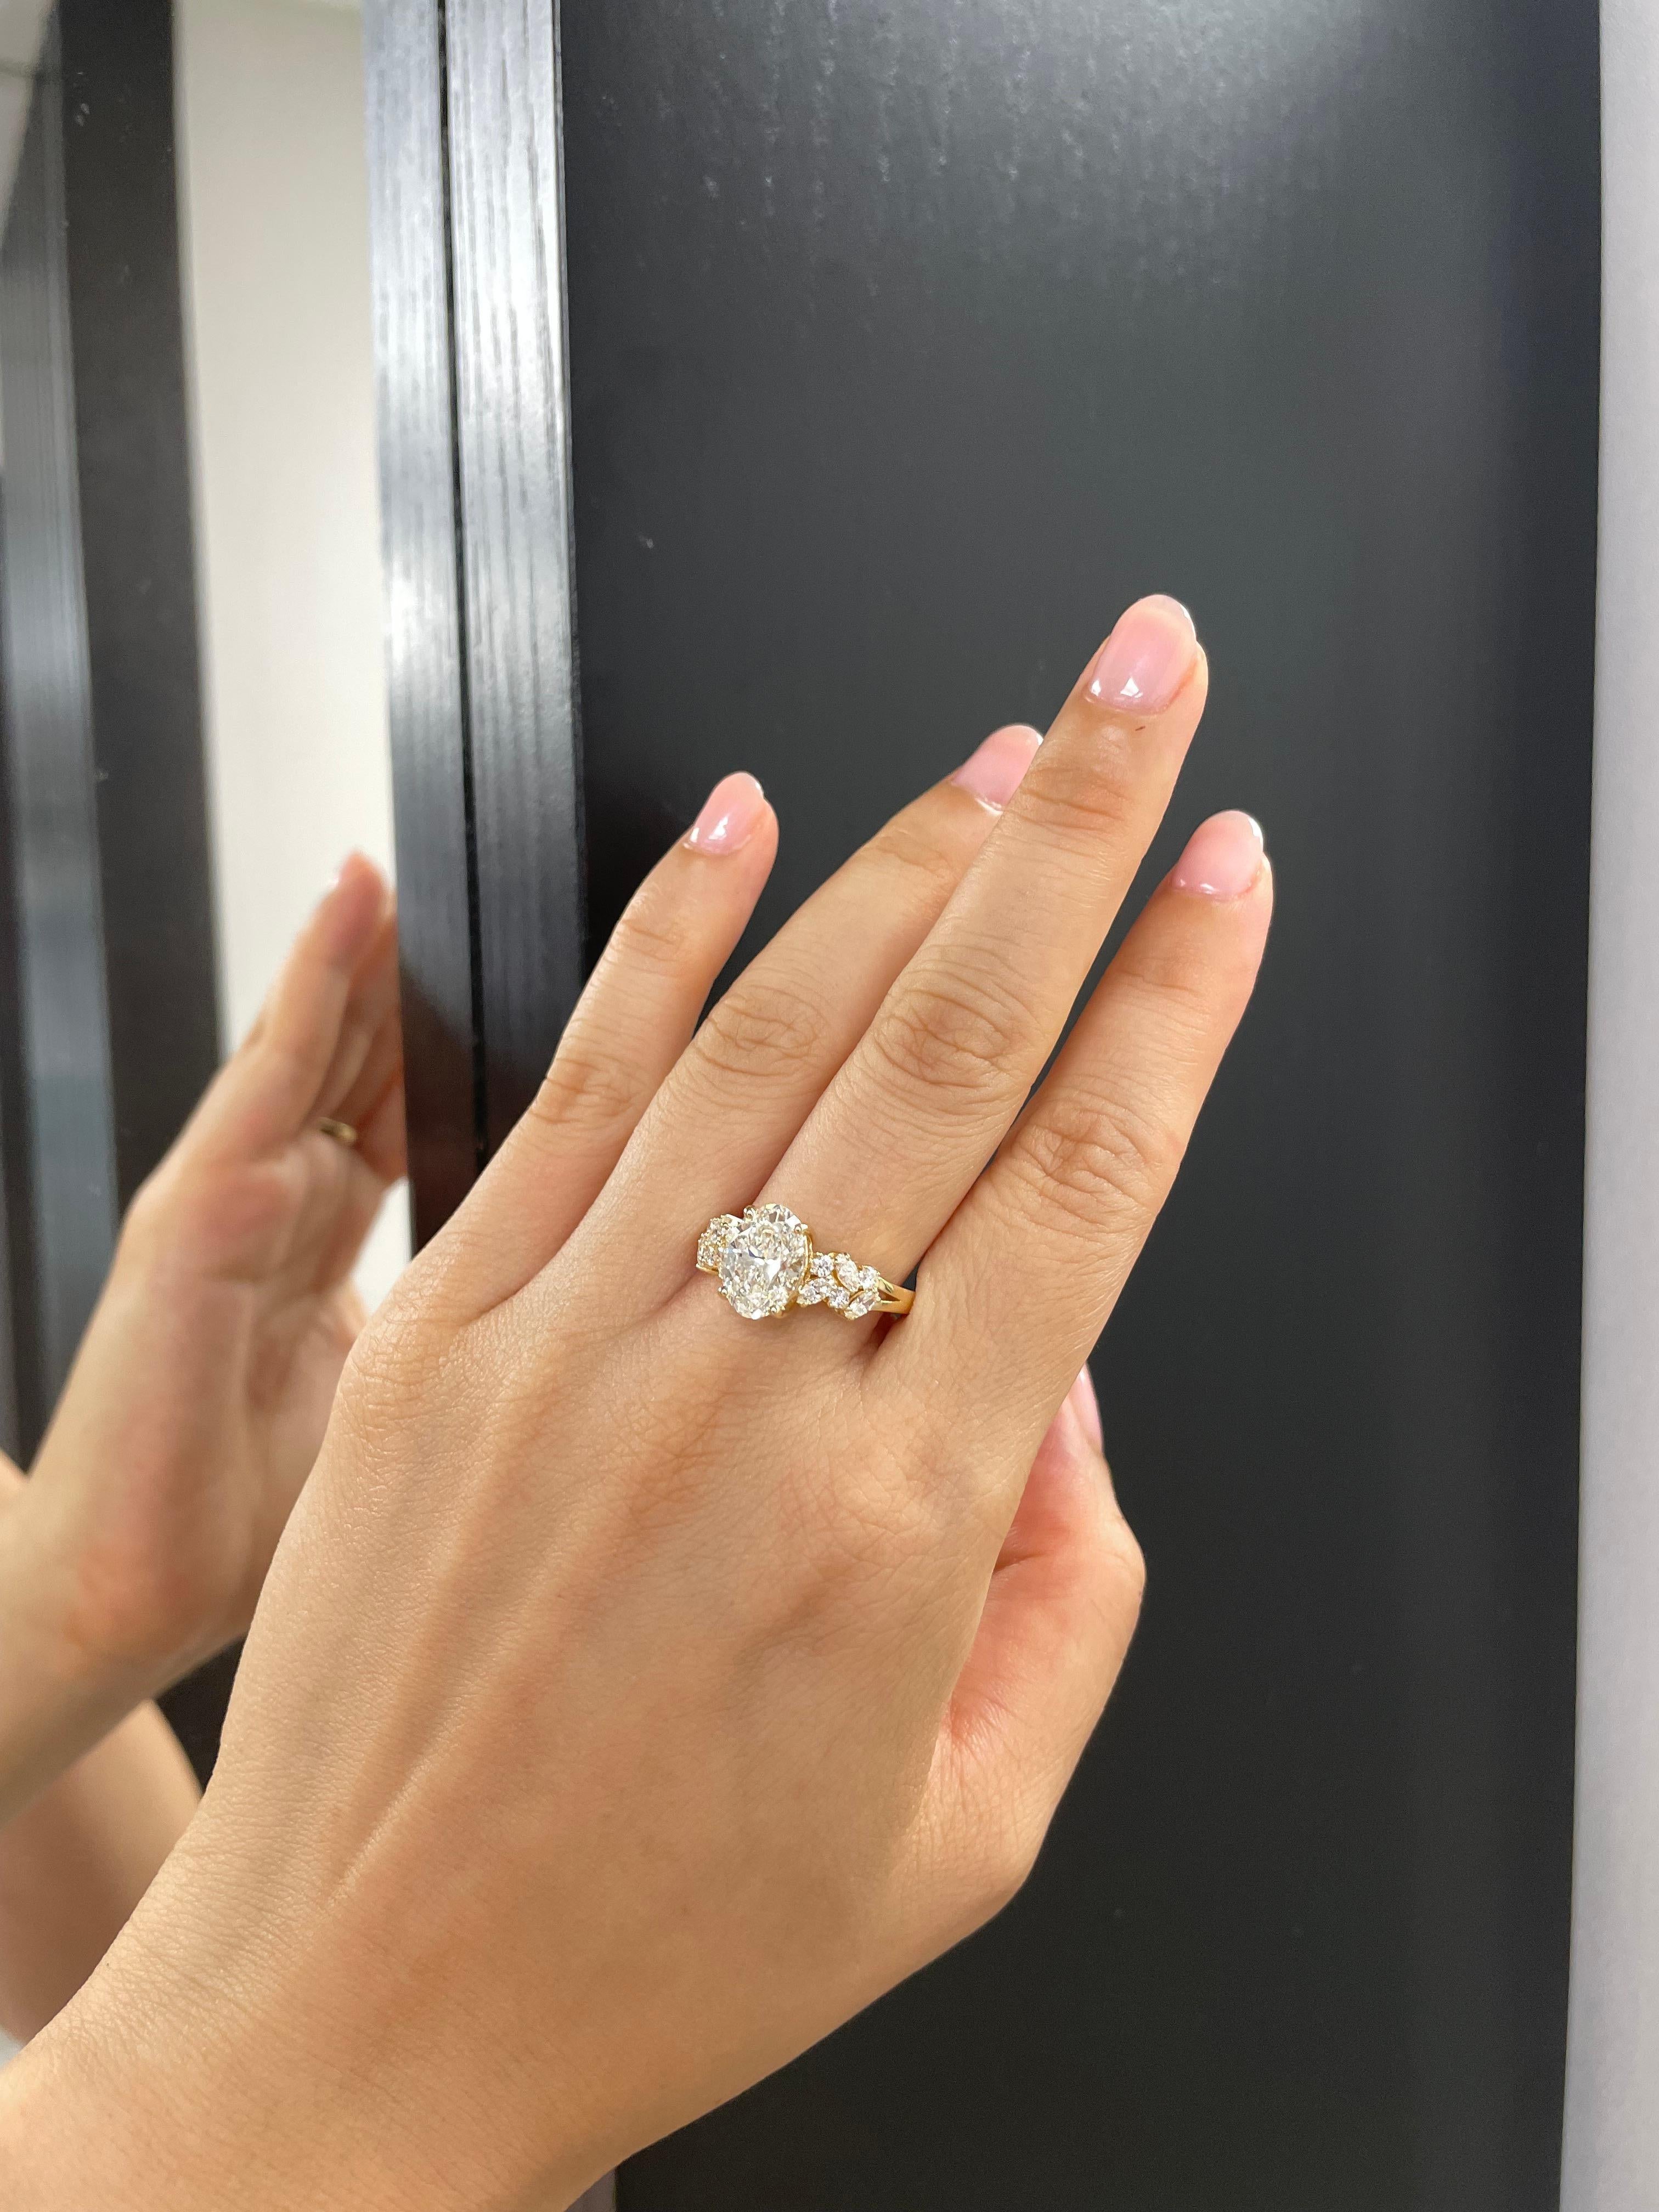 For Sale:  2ct Unique Oval Diamond Engagement Ring in 18k yellow gold  4